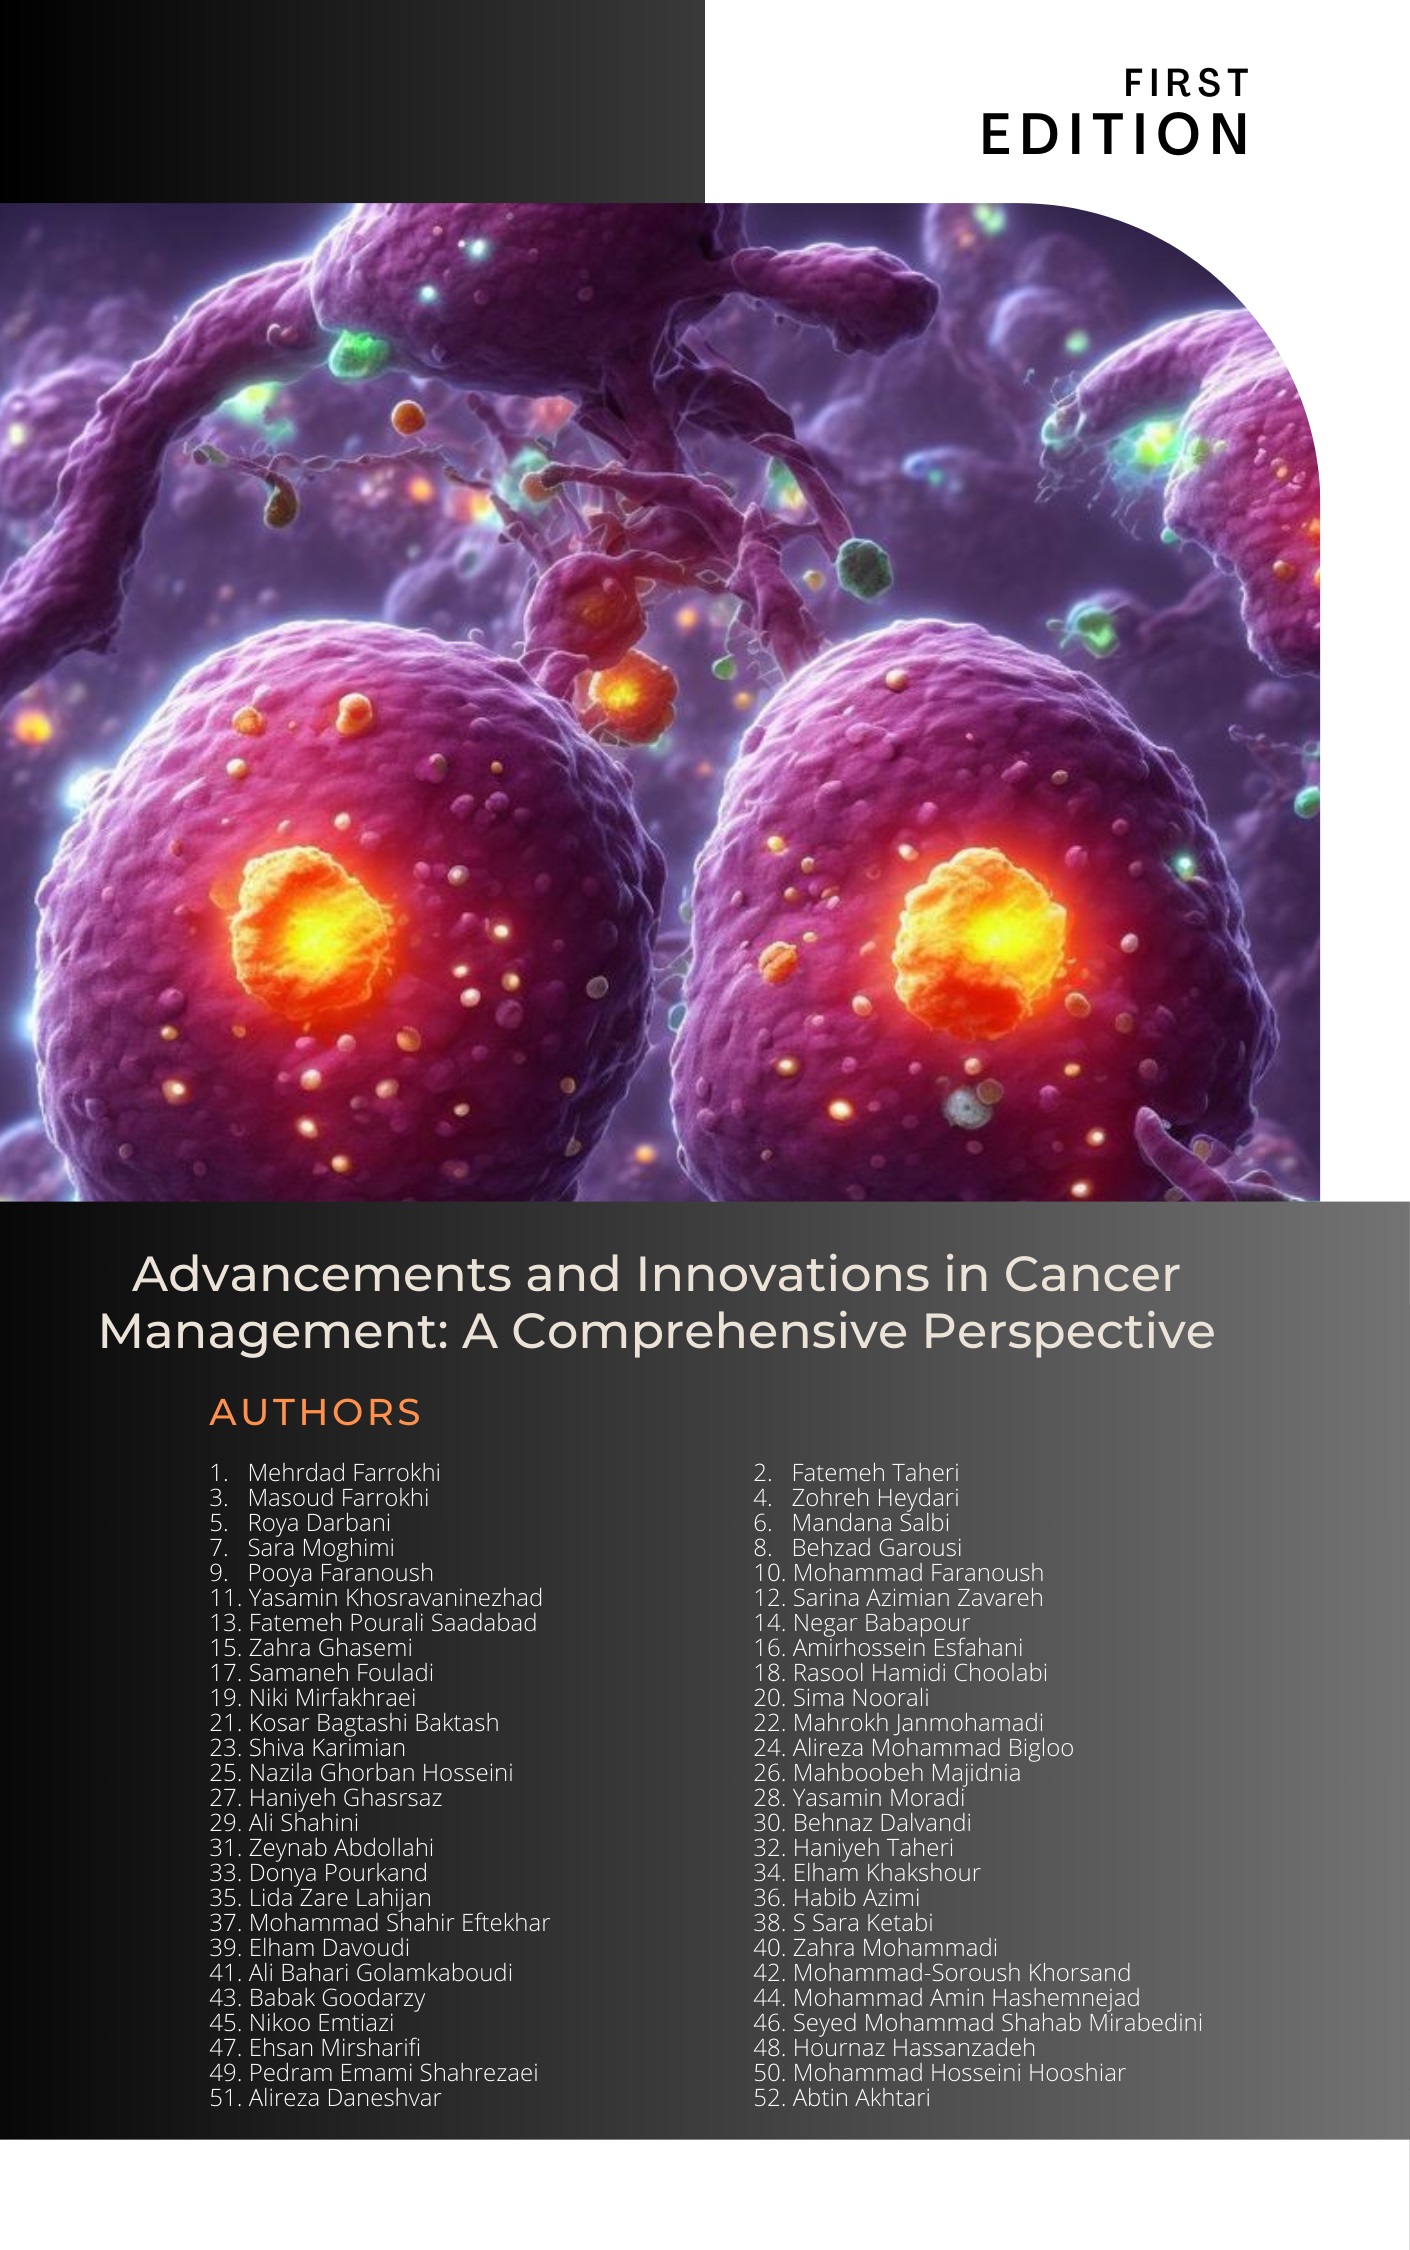 Advancements and Innovations in Cancer Management: A Comprehensive Perspective 